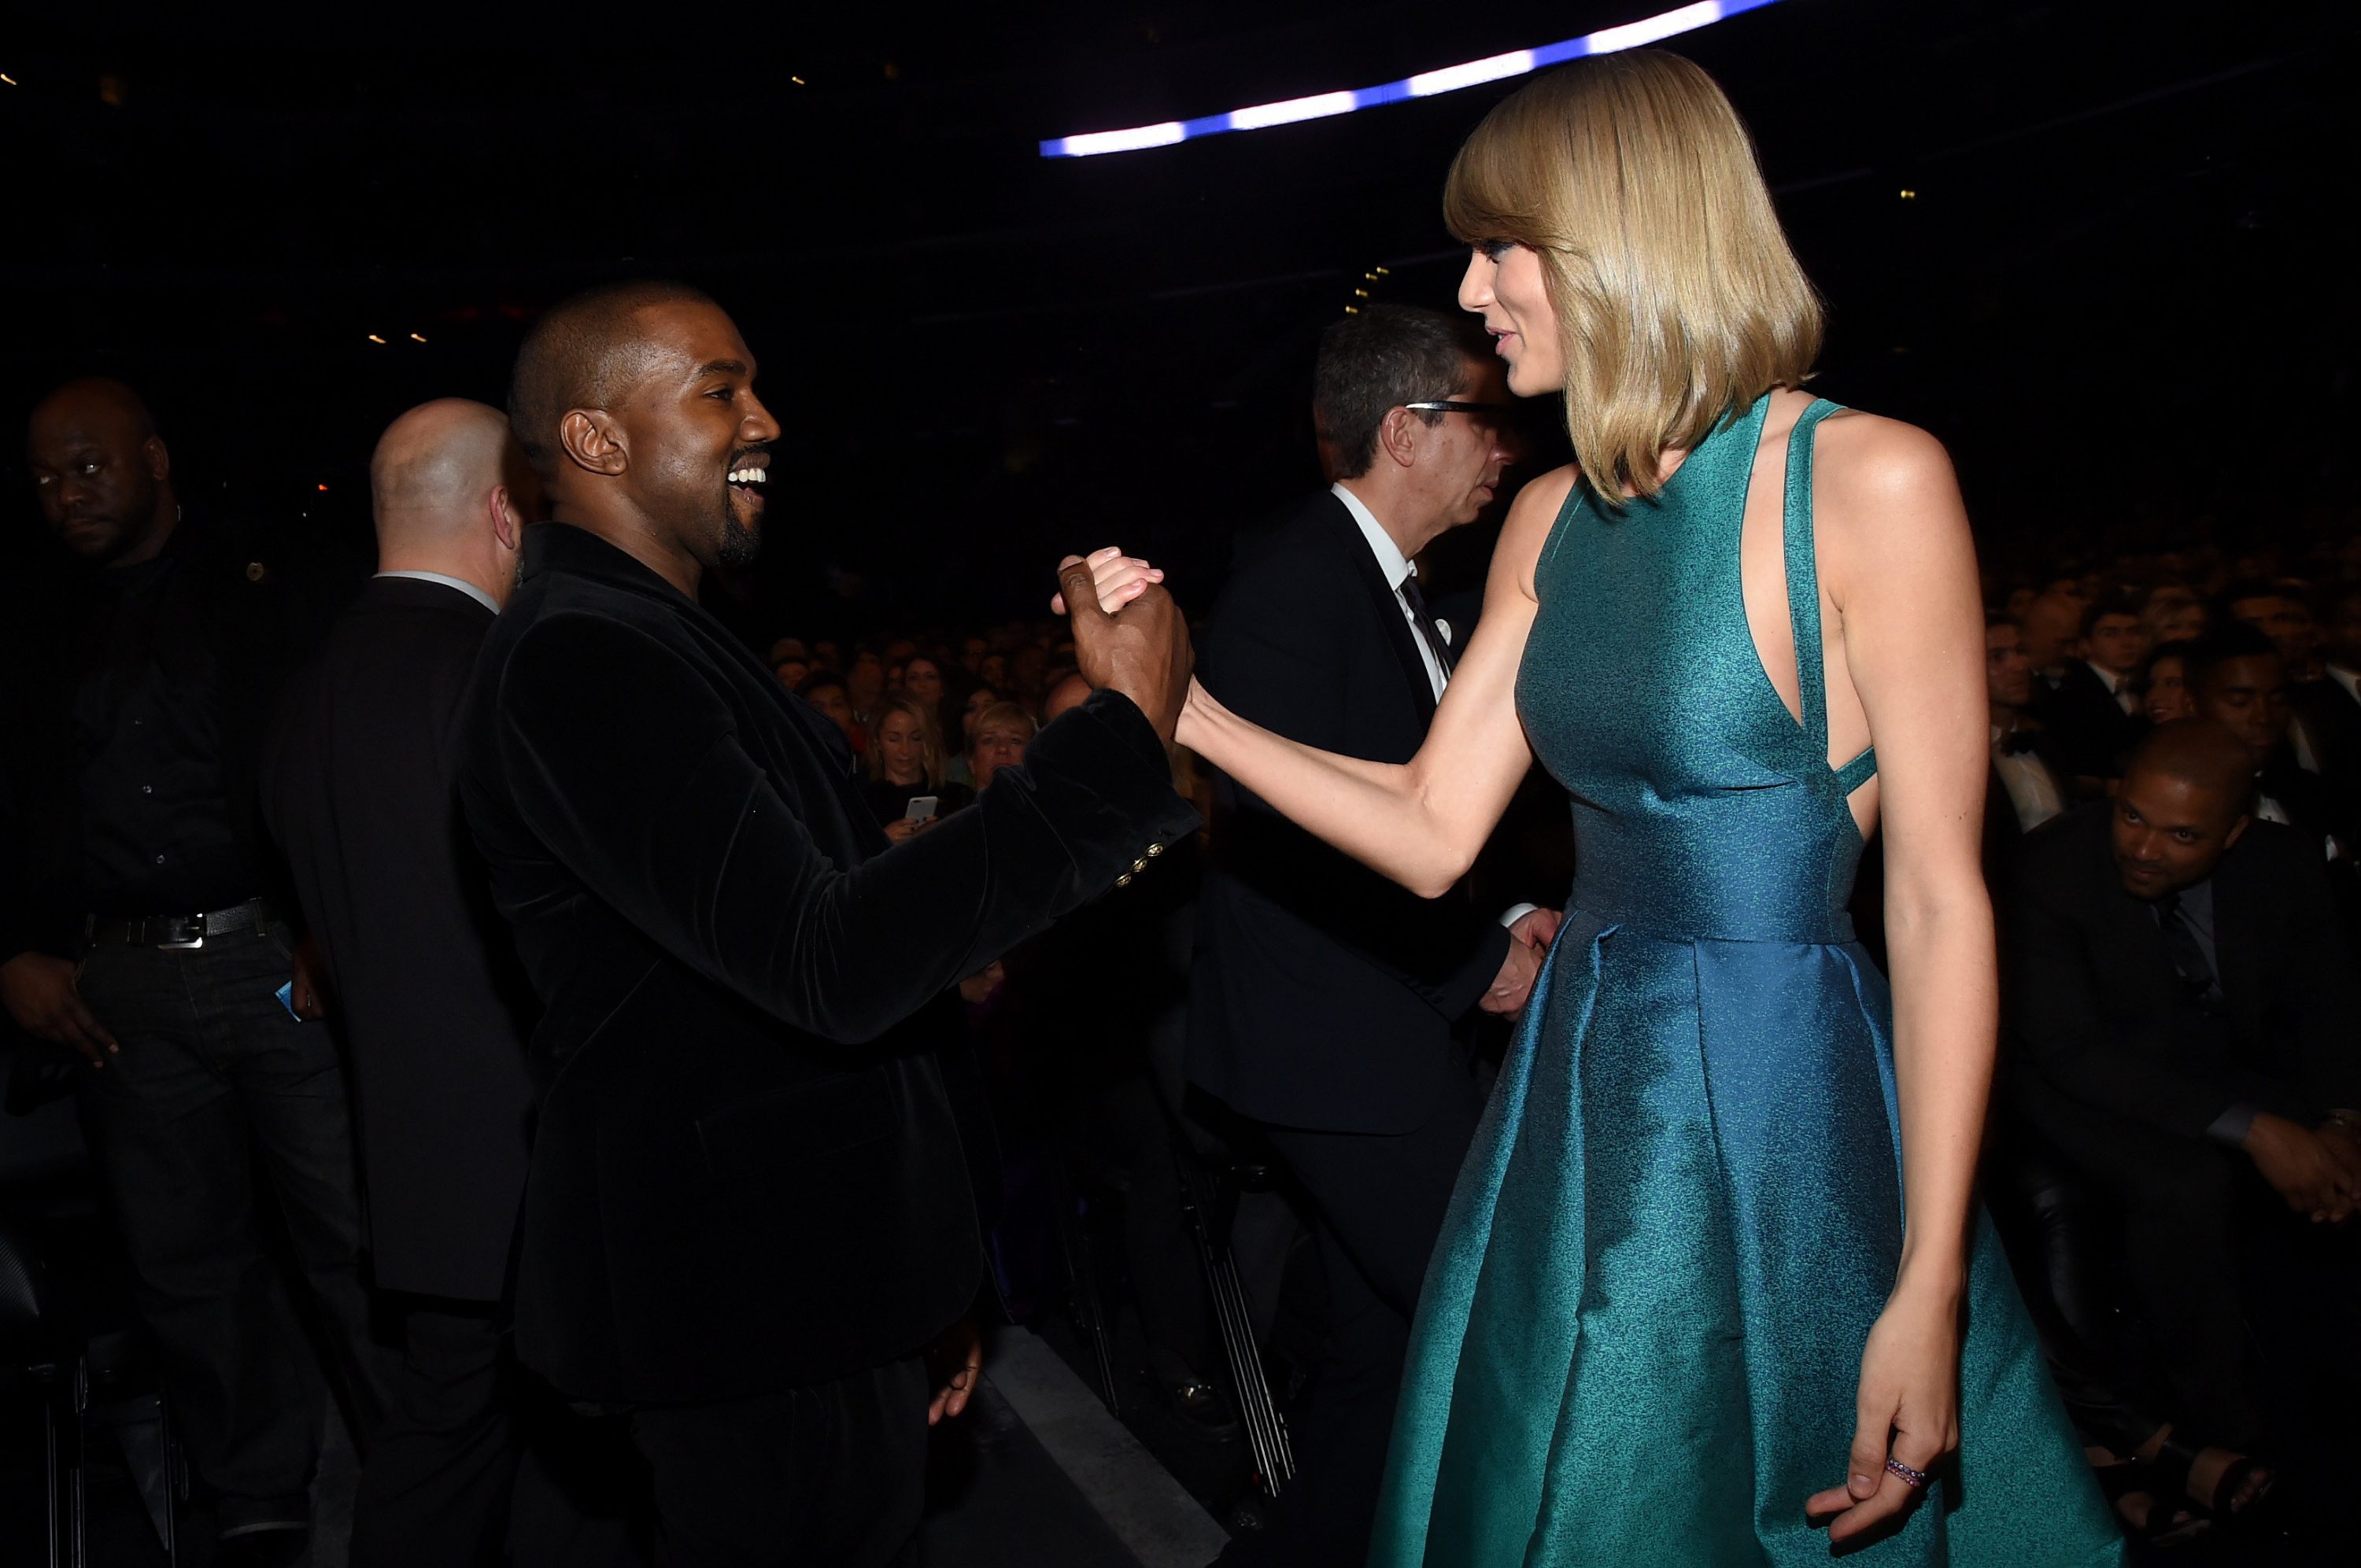 Recording Artists Kanye West and Taylor Swift attend The 57th Annual GRAMMY Awards at the STAPLES Center on Feb. 8, 2015 in Los Angeles. (Larry Busacca—Getty Images)